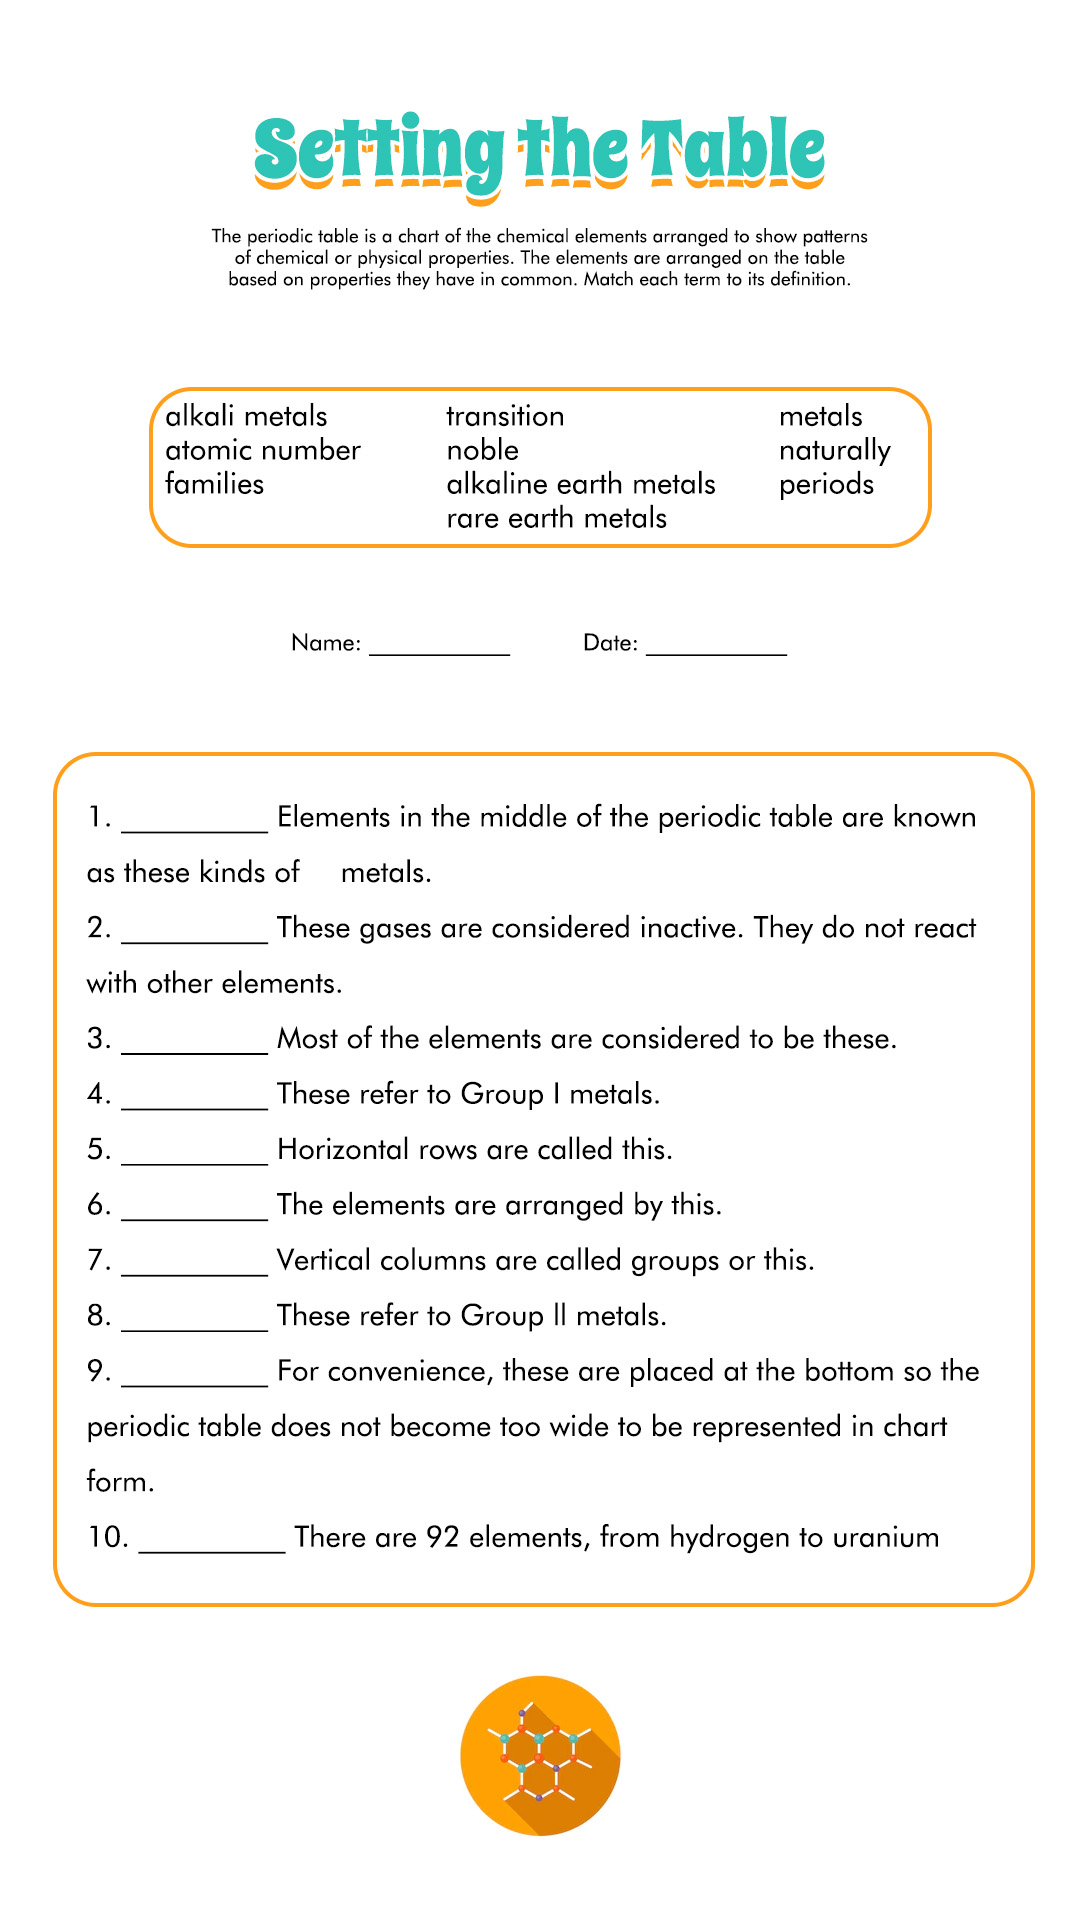 Periodic Table Worksheet Answers Image